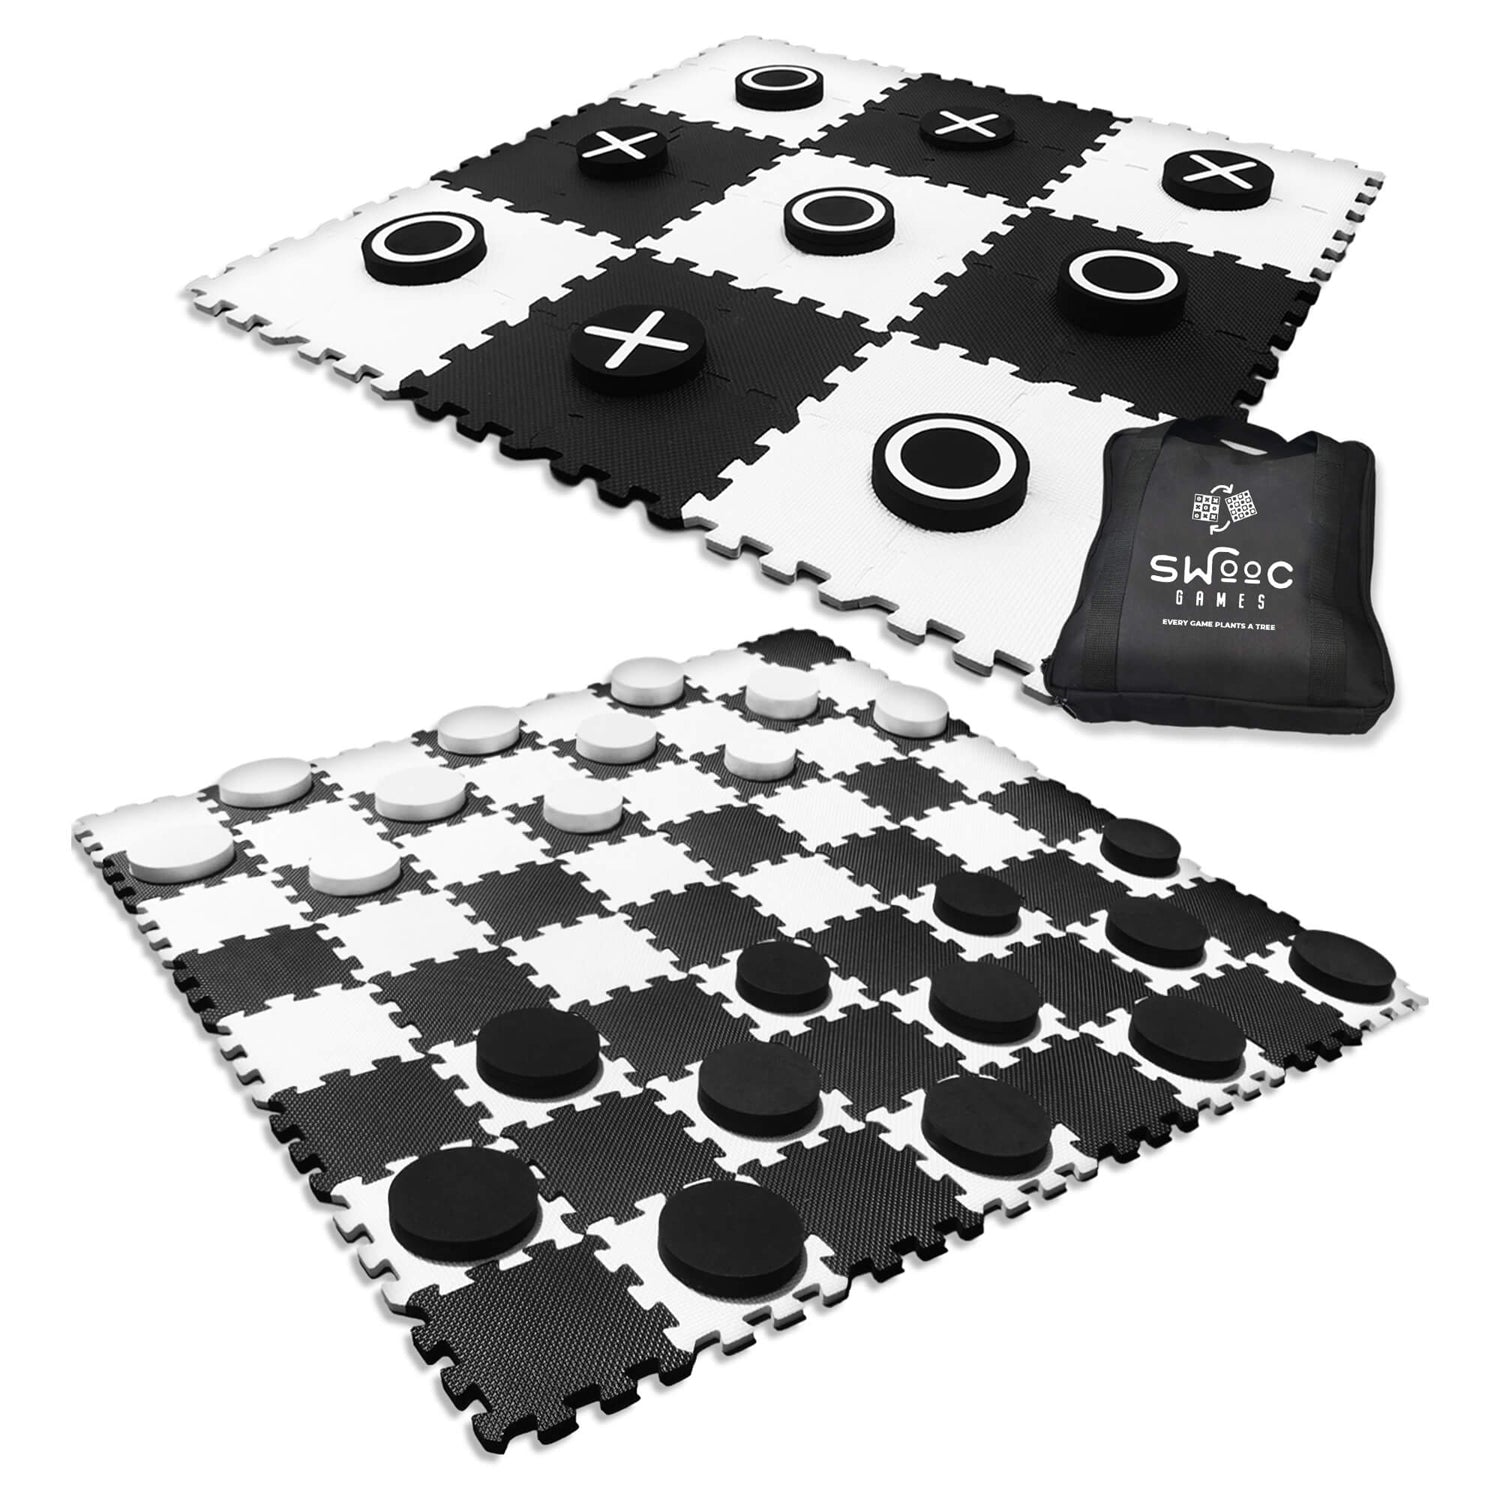 2-in-1 Giant Checkers & Tic Tac Toe Game in Black